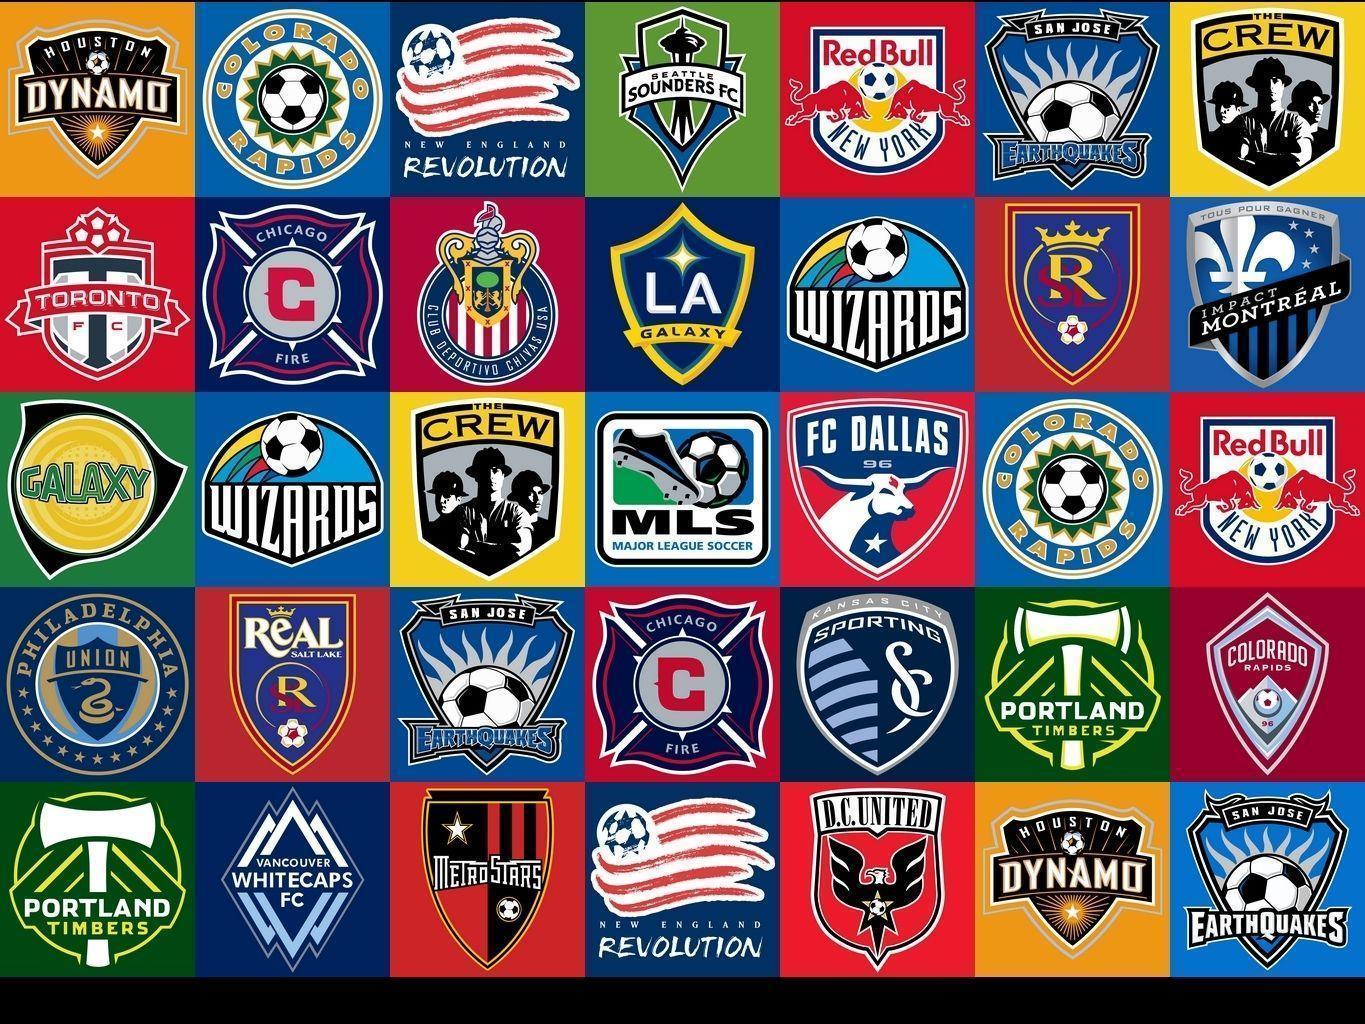 For Major League Soccer. Deconstructed Logos for all MLS Teams